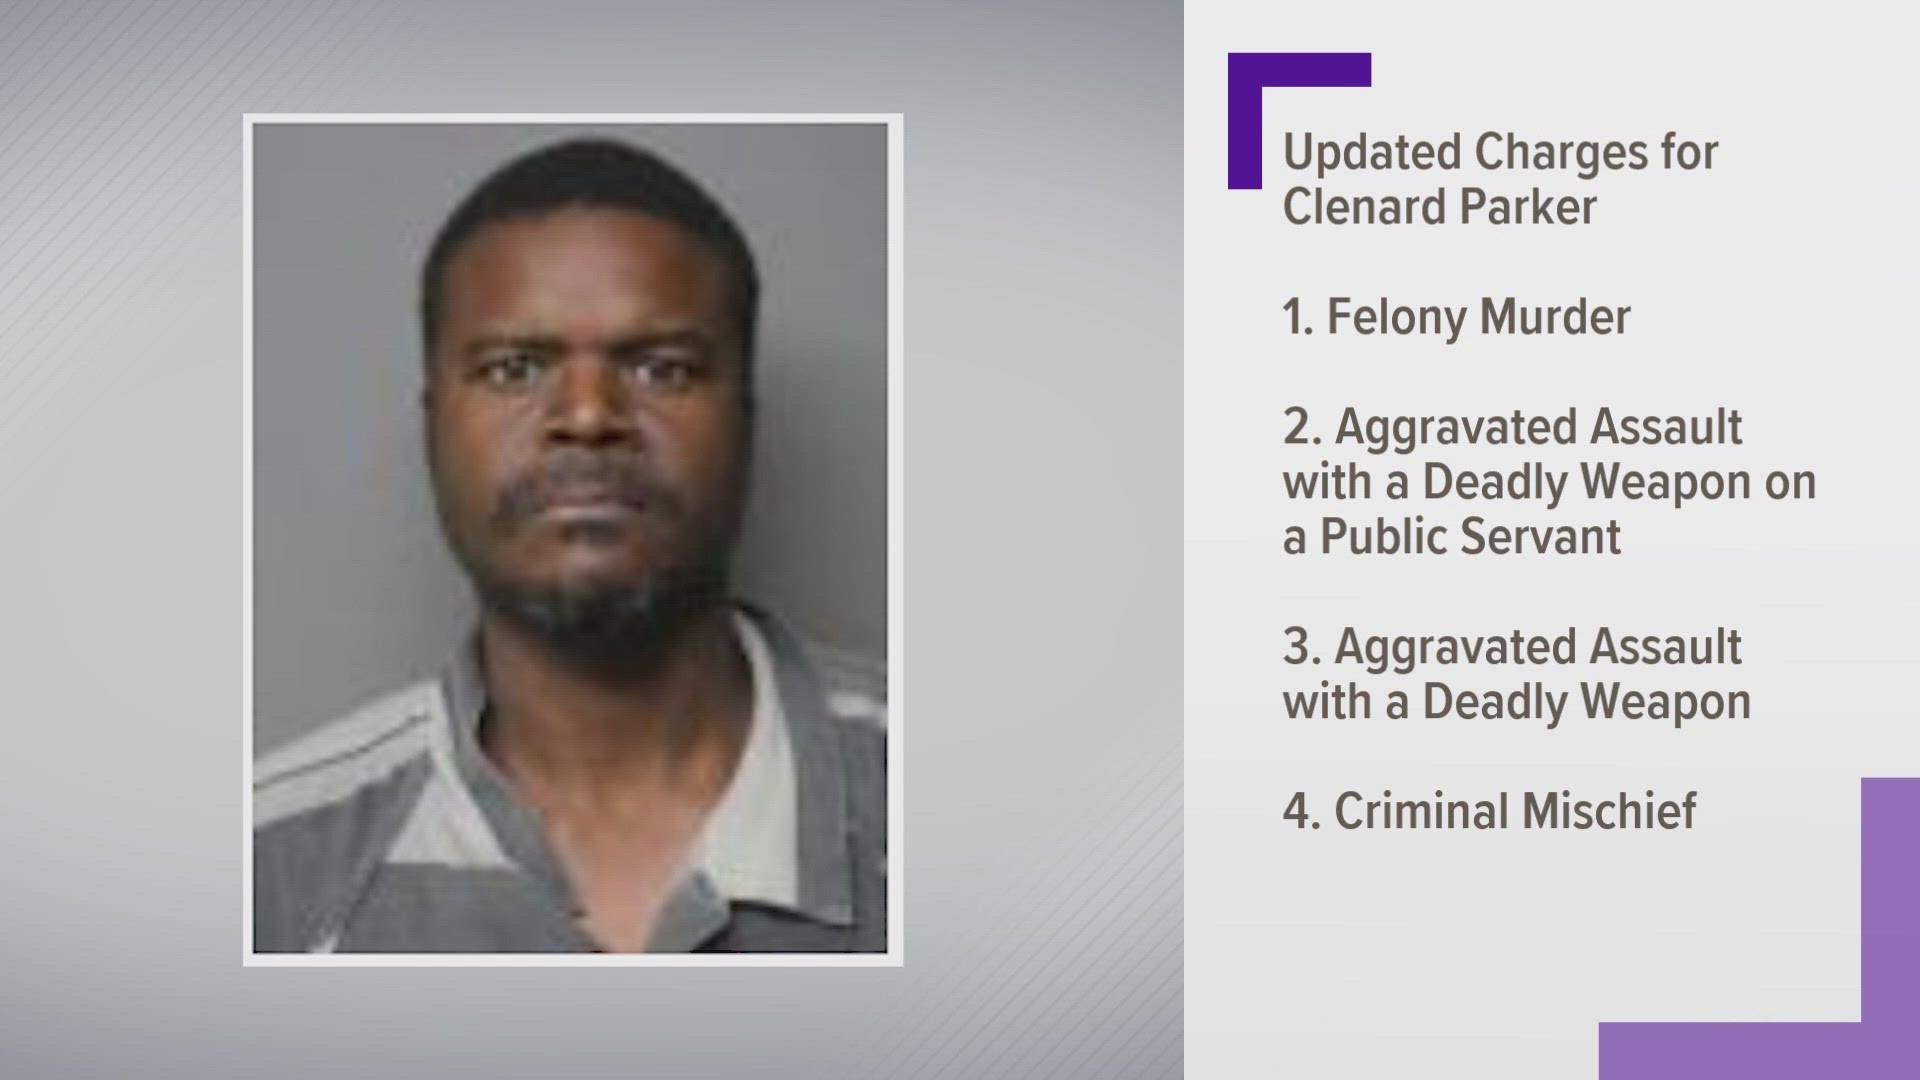 Clenard Parker is accused of intentionally crashing a big rig into a Texas DPS office in Brenham after he was denied a Commercial Driver's License.